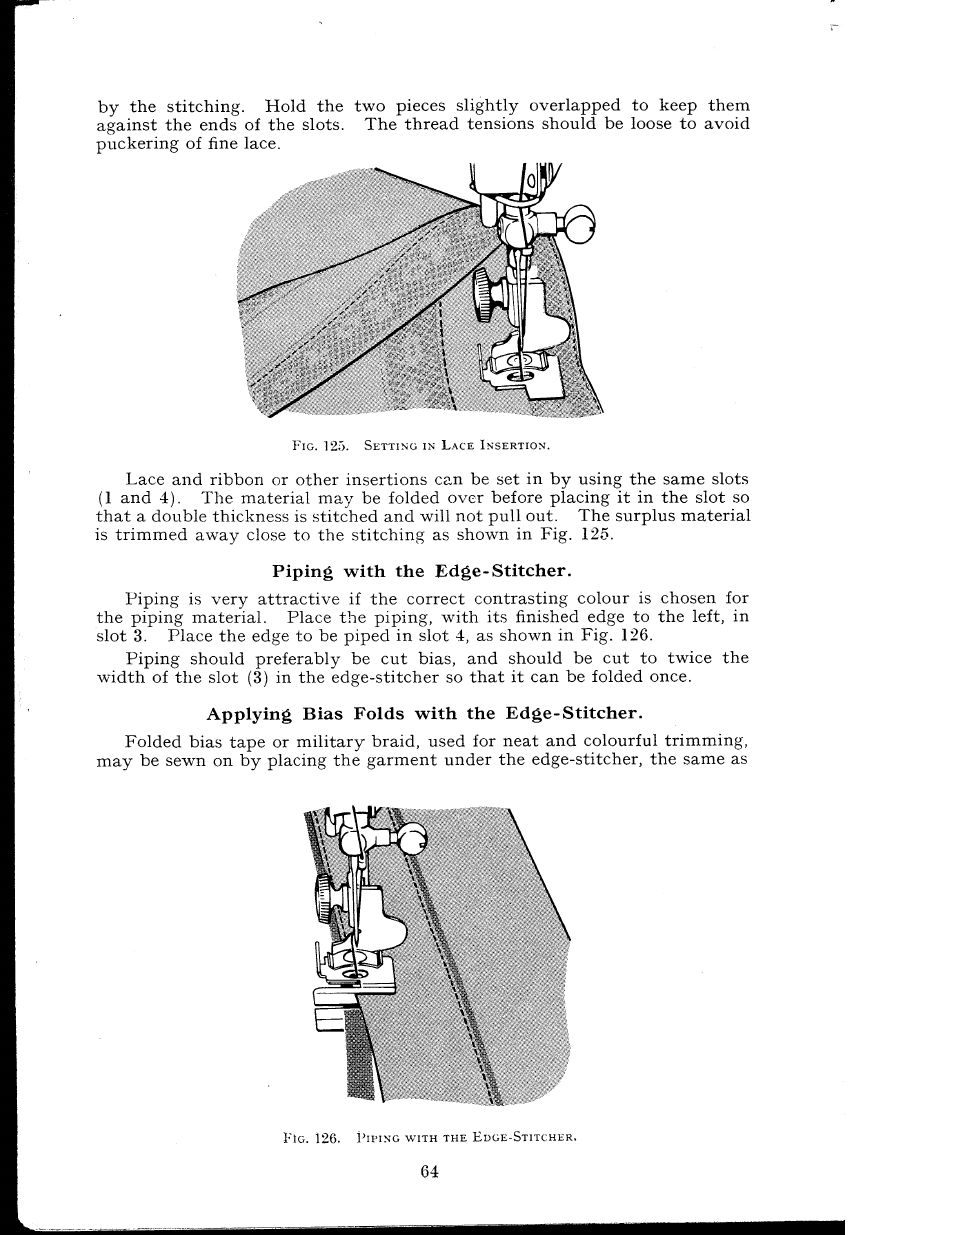 Piping with the edge-stitcher, Applying bias folds with the edge-stitcher | SINGER 404K User Manual | Page 64 / 78